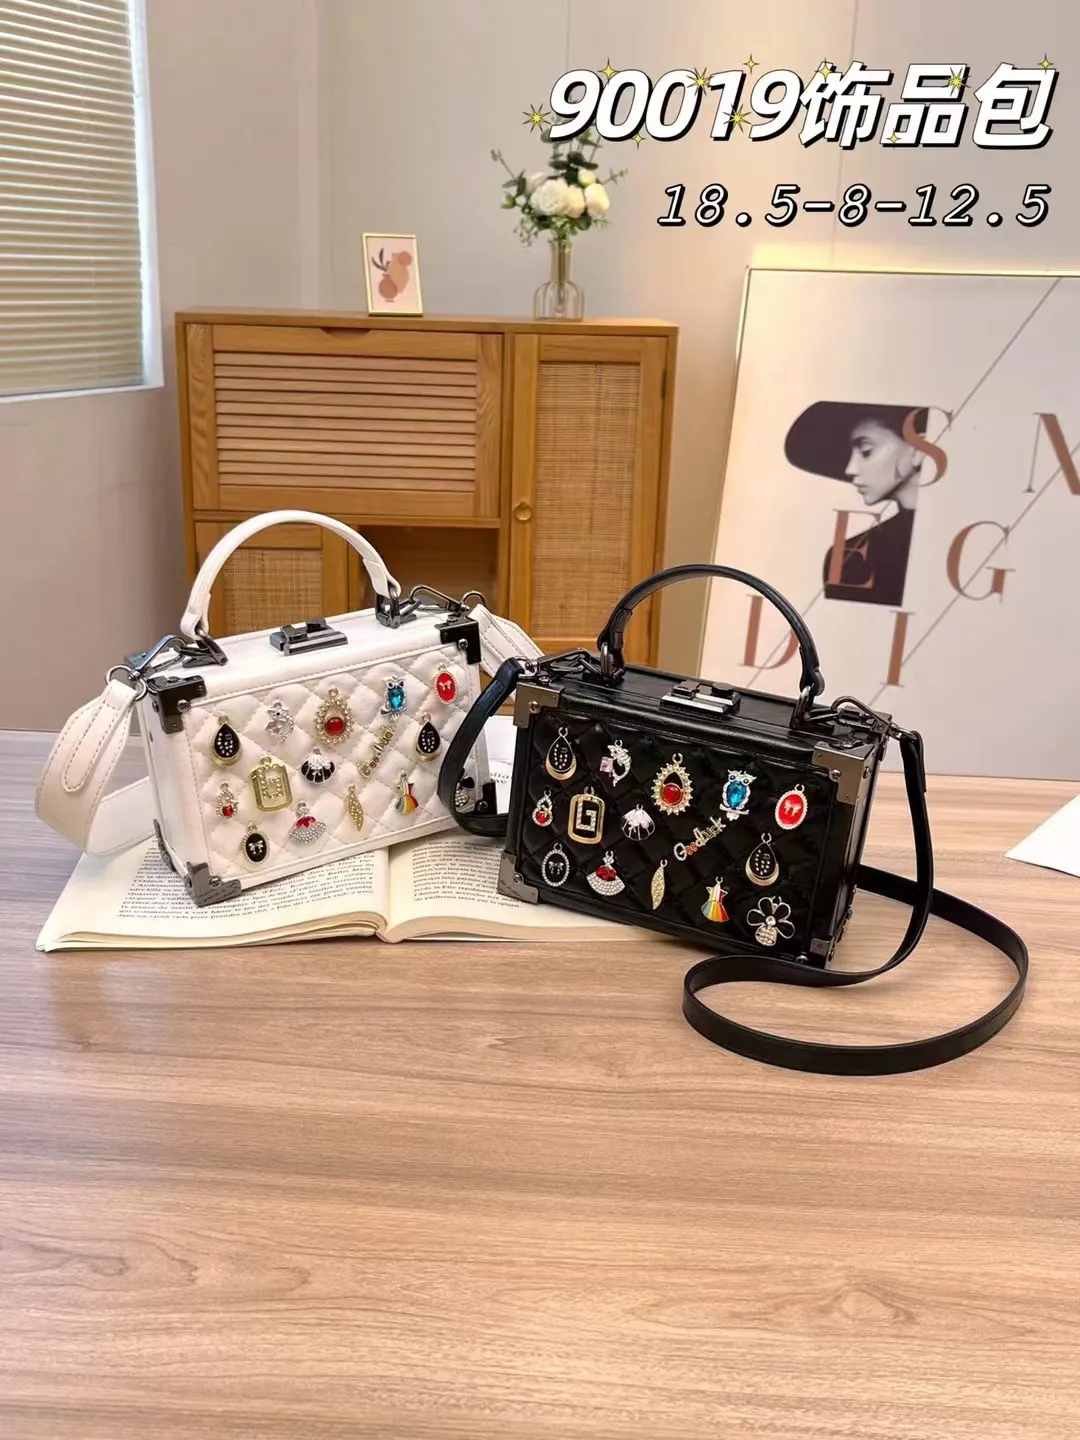 The latest pure manual heavy industry box bag fashion handbag with button shoulder bag 18.5*8*12.5